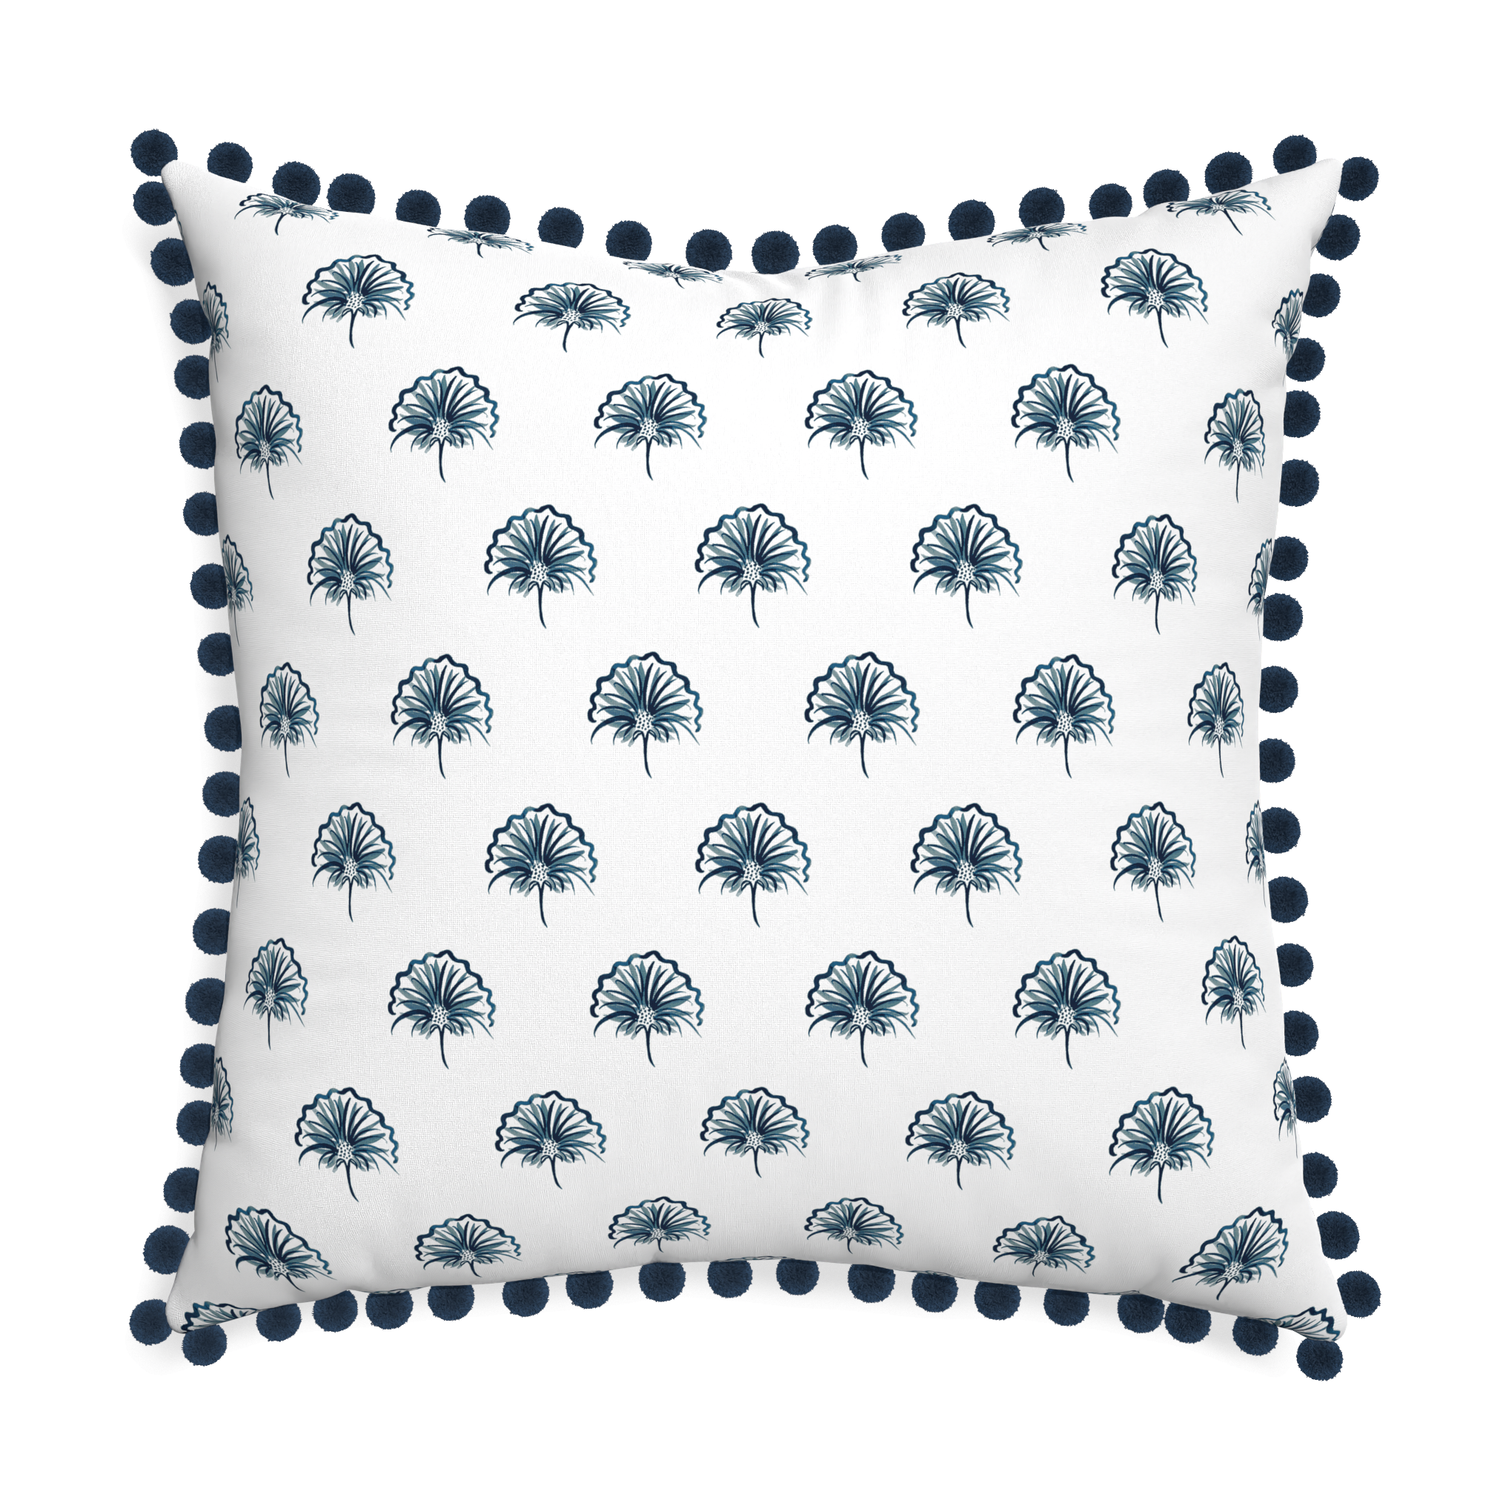 Euro-sham penelope midnight custom floral navypillow with c on white background